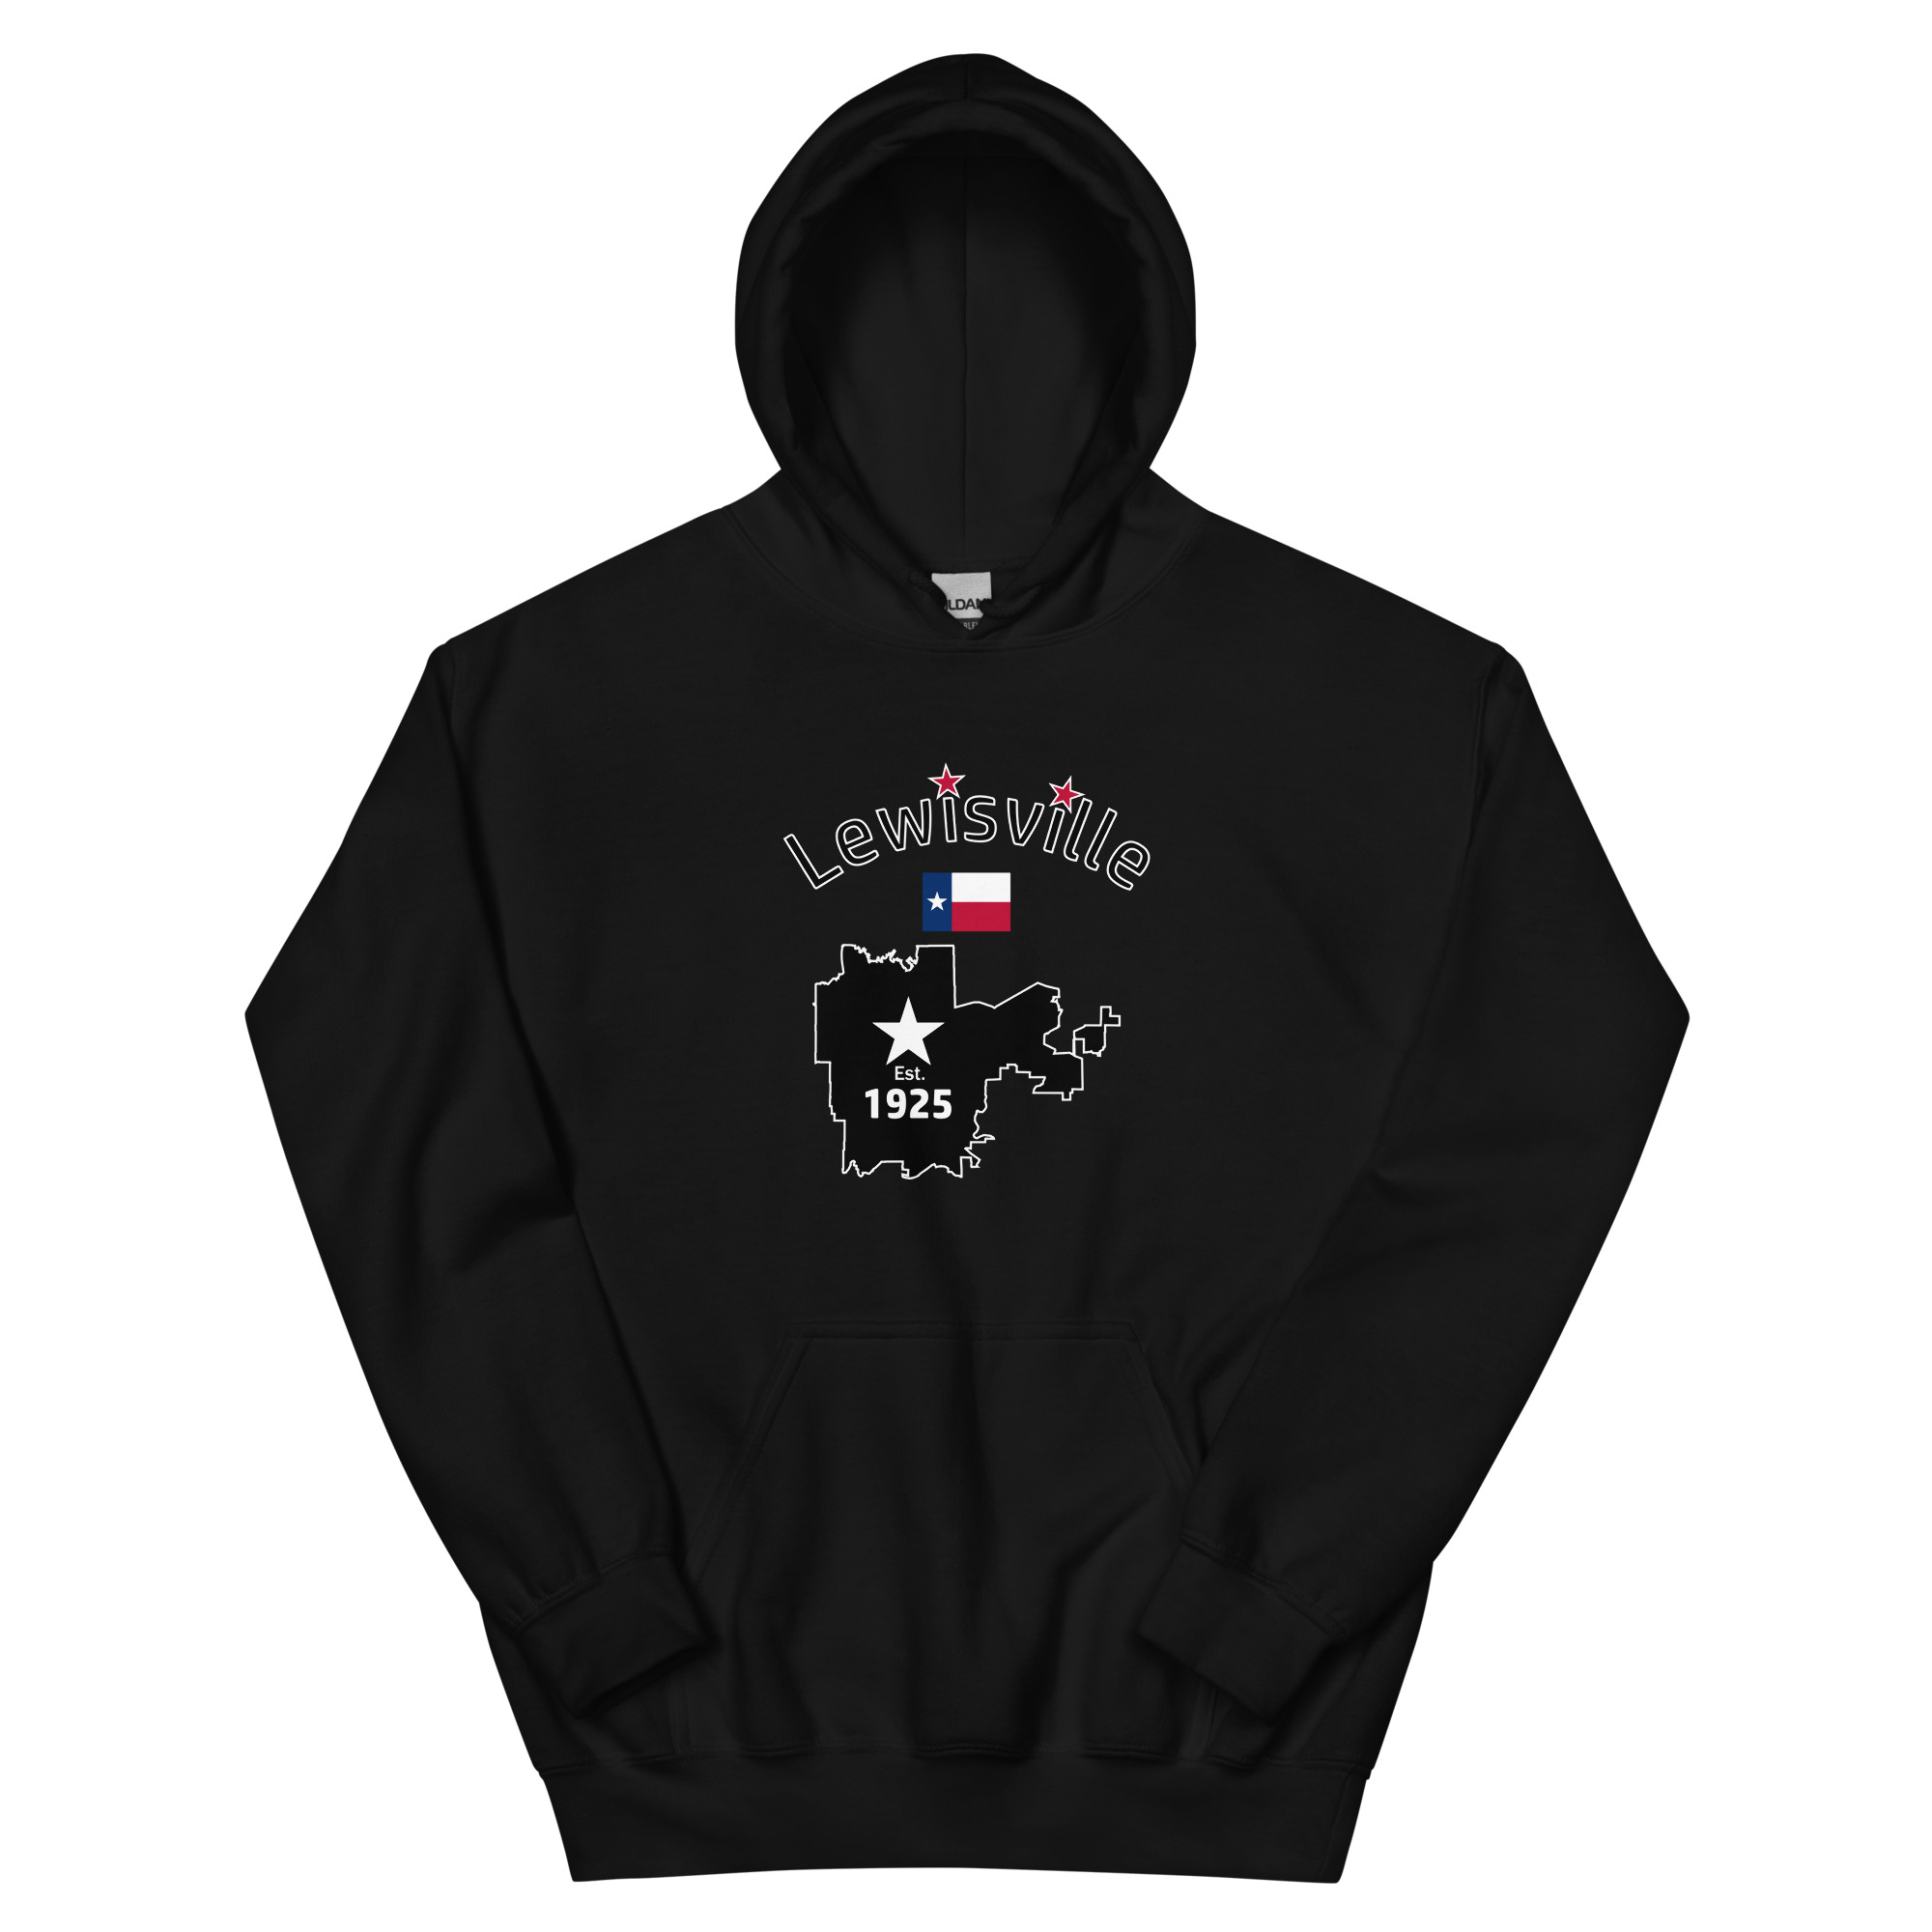 Lewisville Texas Hoodie with State Outline and Est. 1925 Design